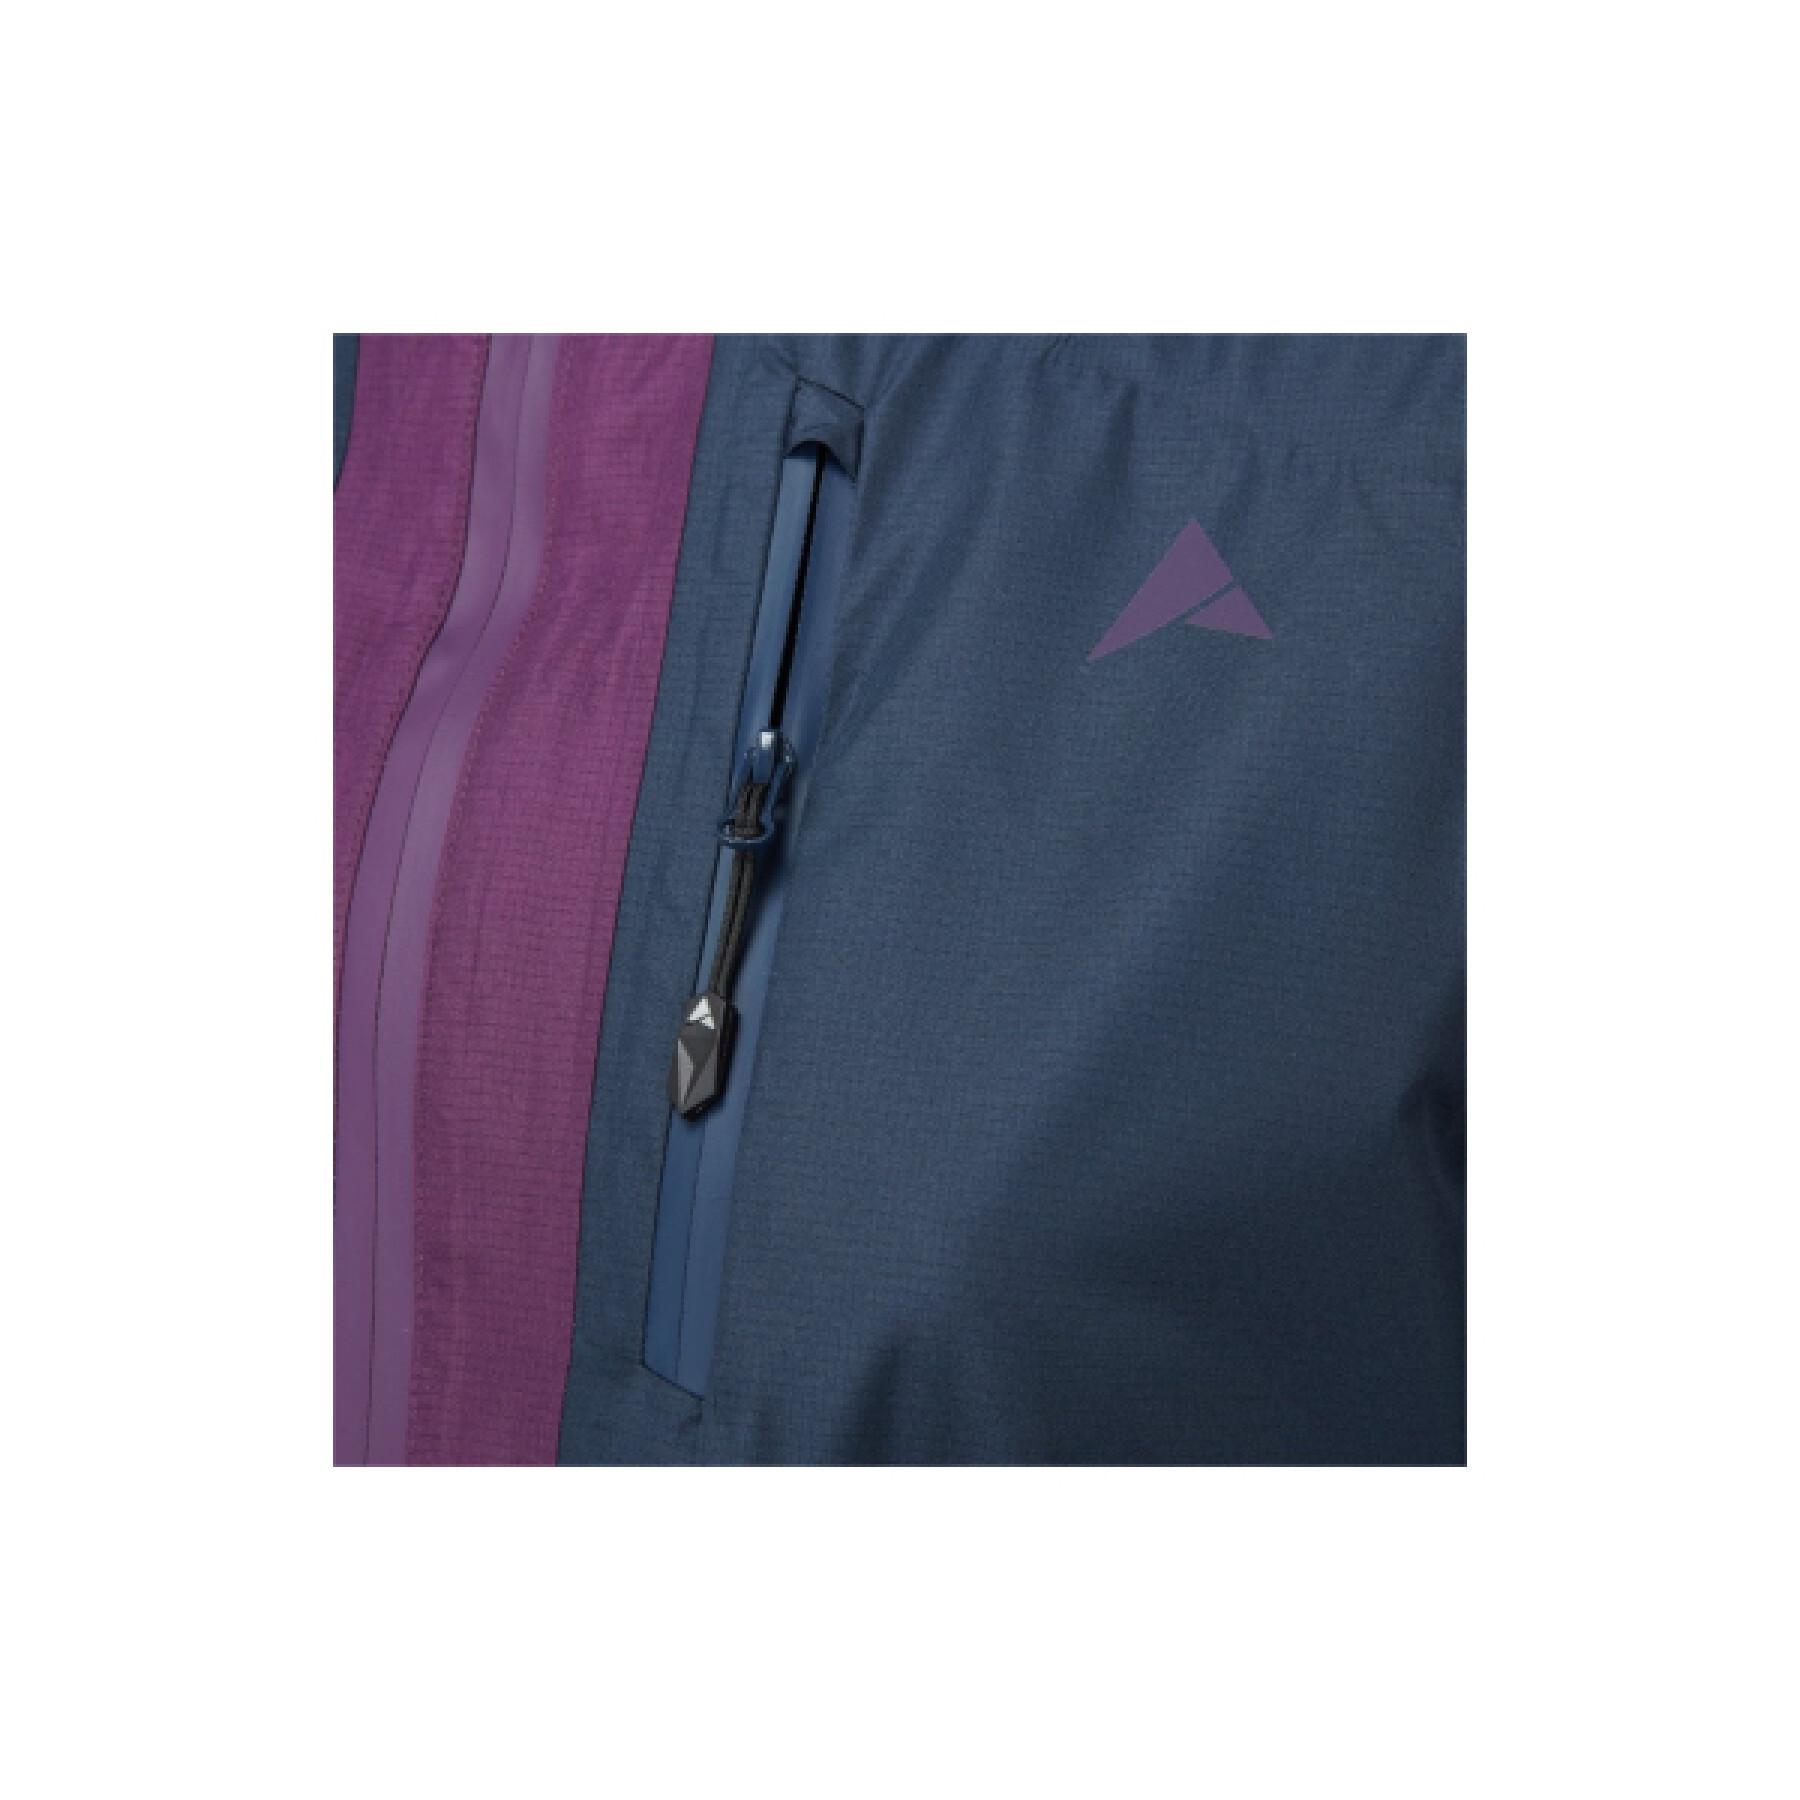 Chaqueta impermeable mujer Altura Typhoon Nightvision